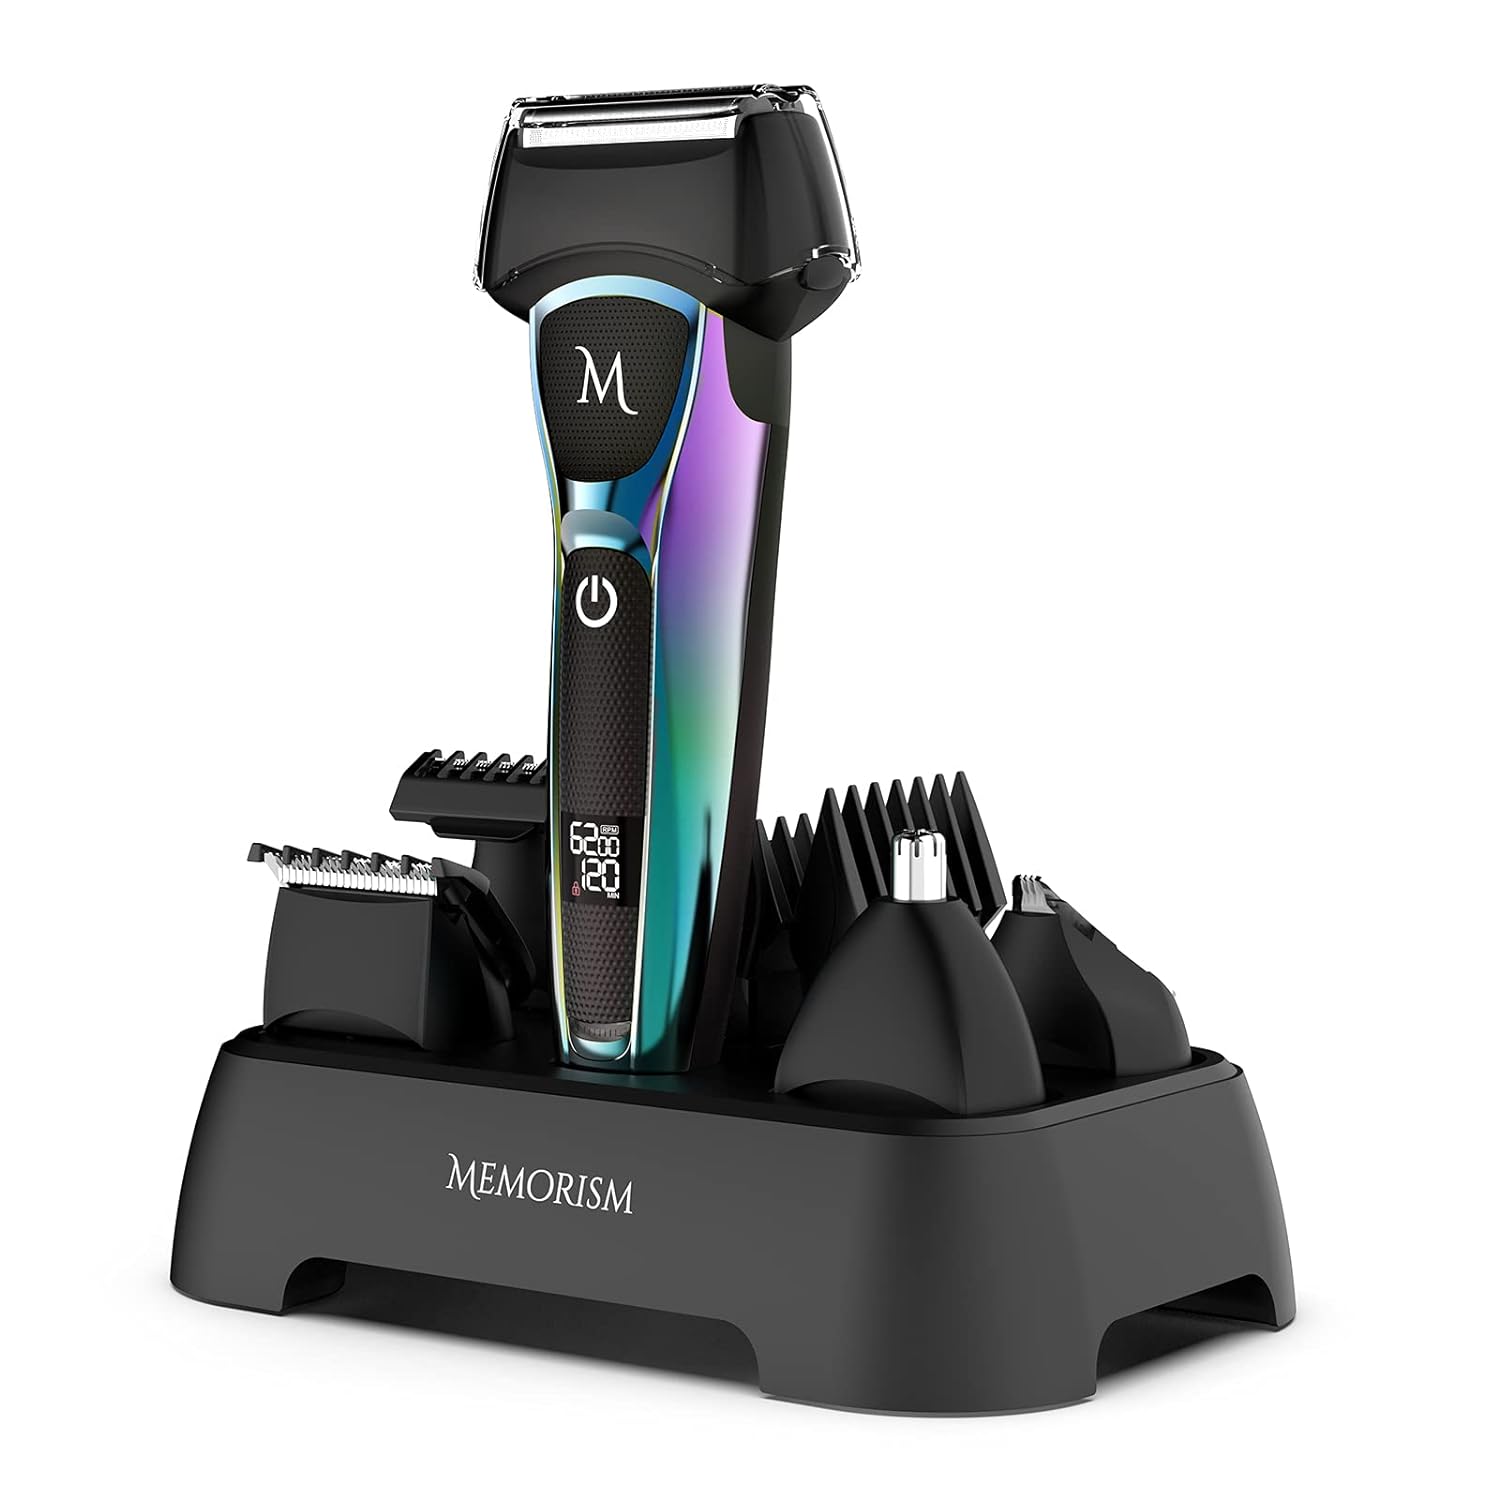 Memorism Multifunction Men’s Grooming Kit, Rechargeable with LED Display Blizz GS5 (Purple-Green Gradient)